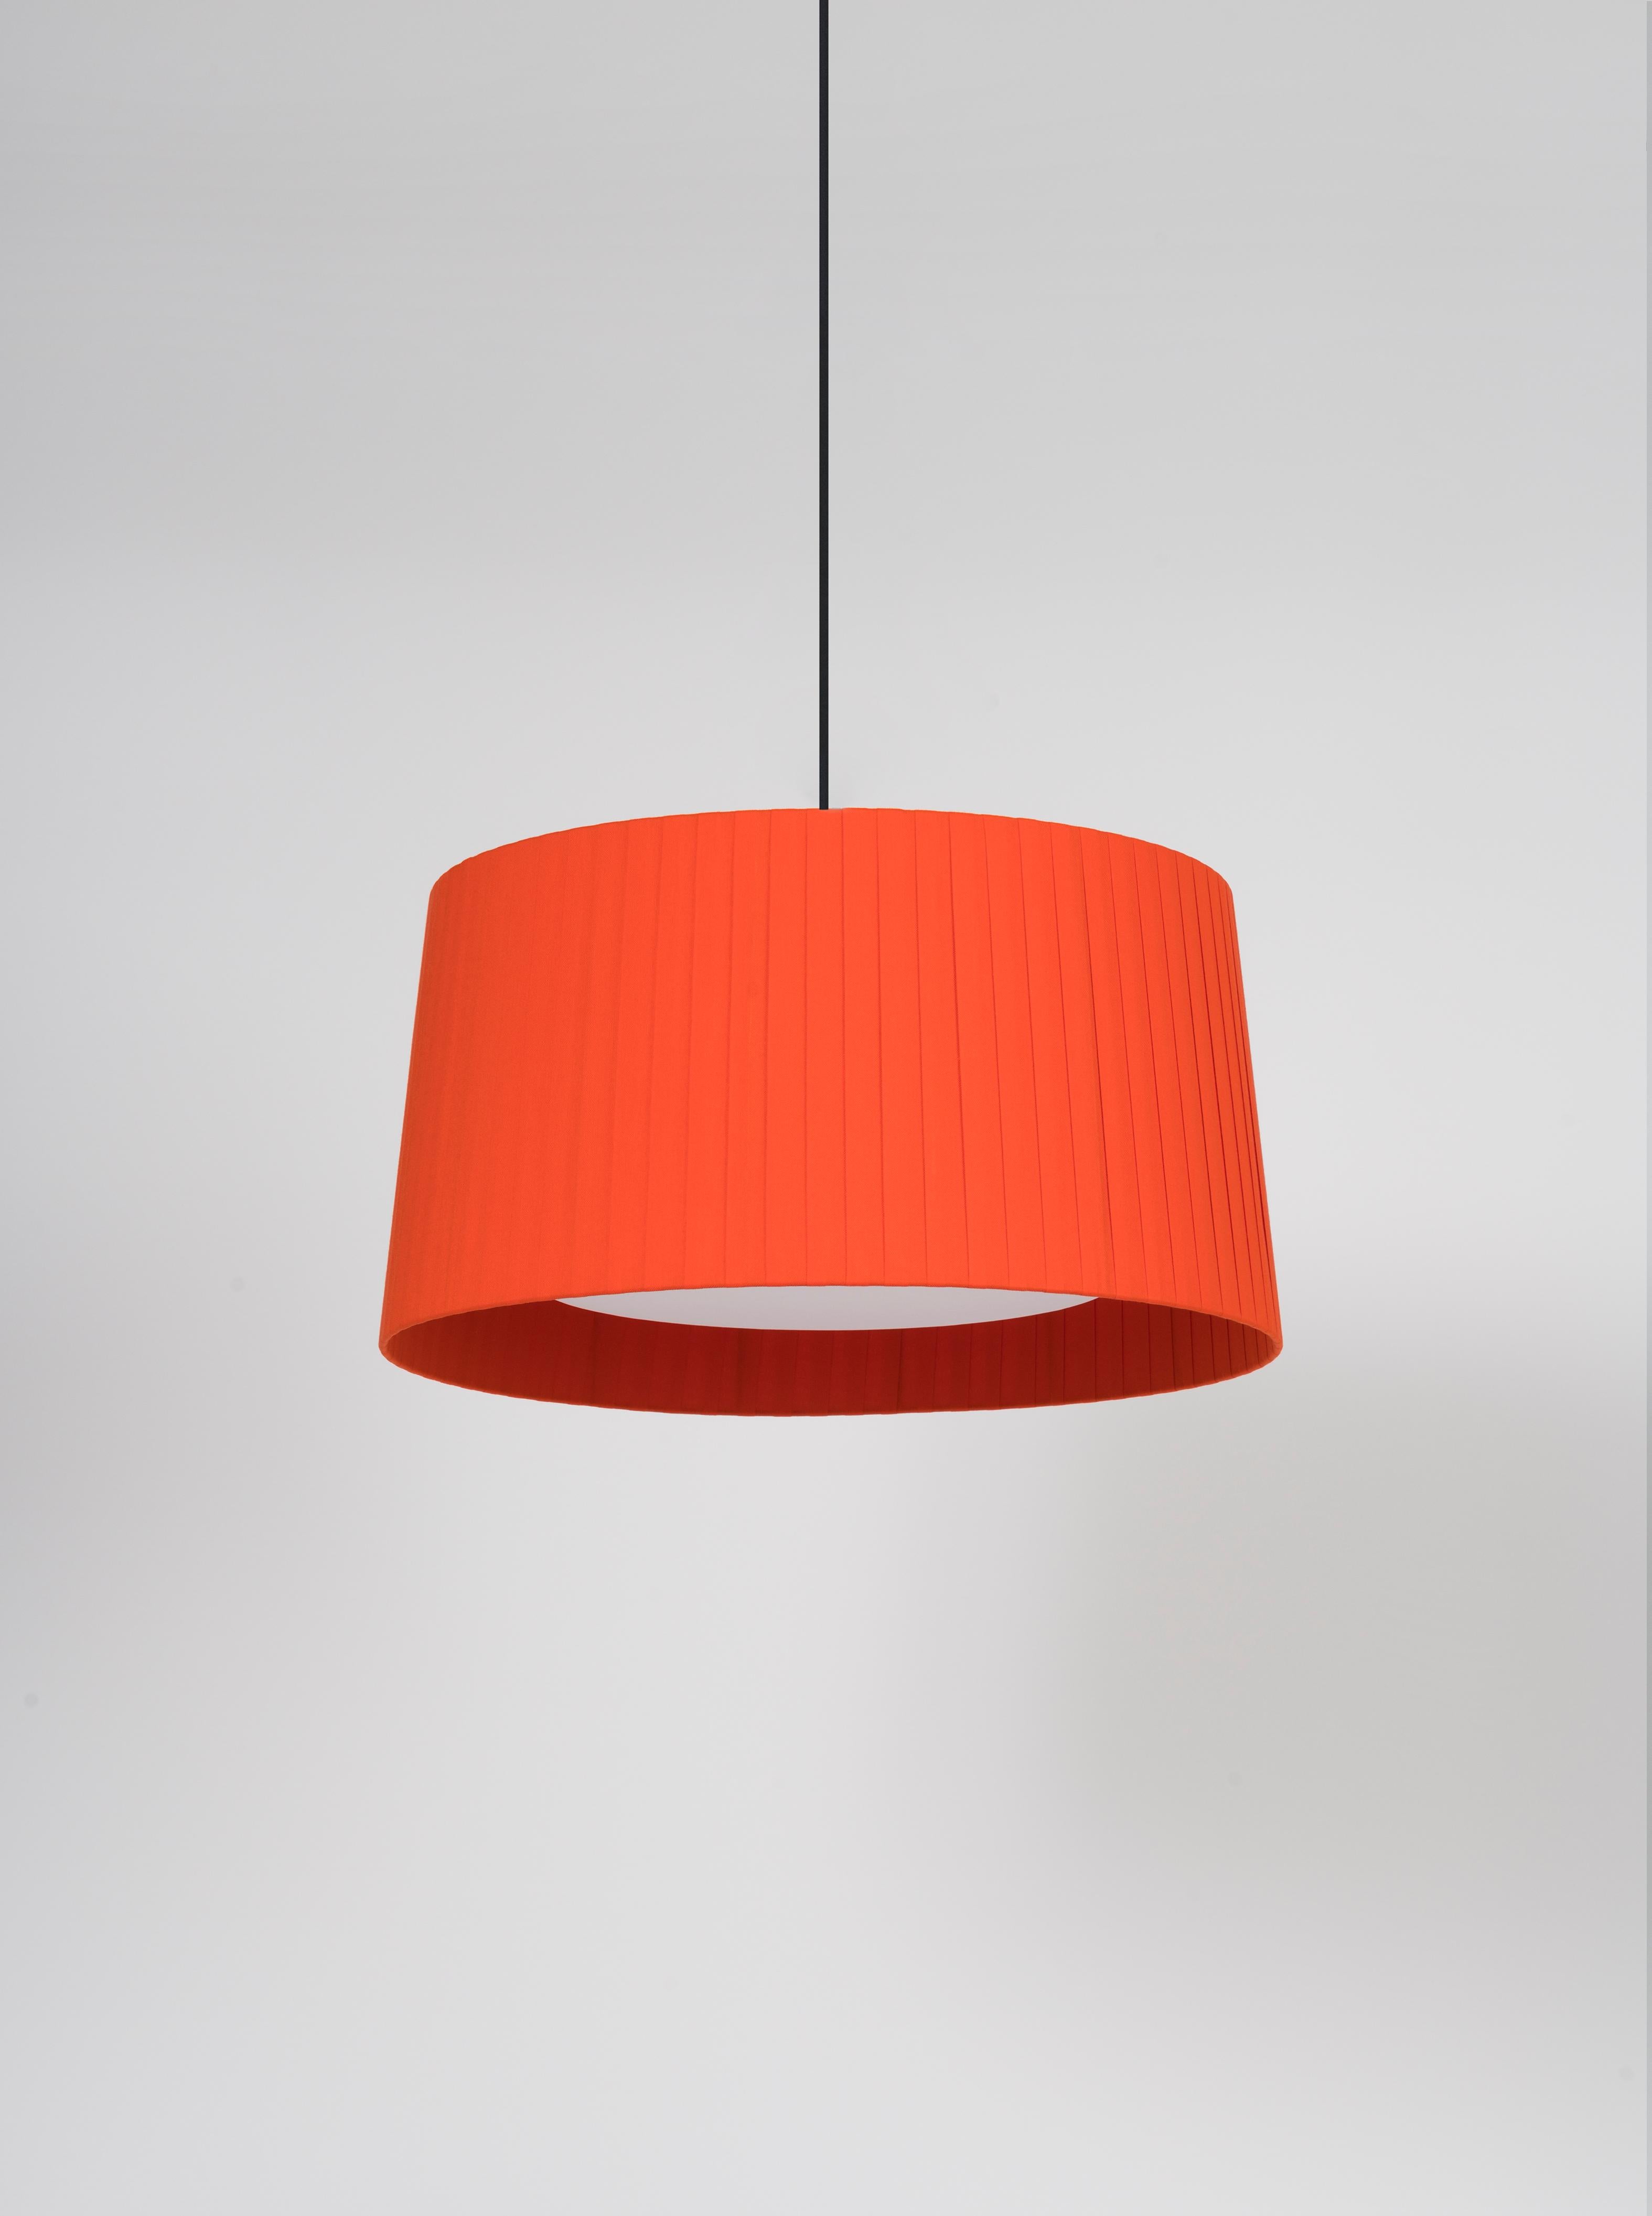 Red GT5 pendant lamp by Santa & Cole
Dimensions: D 62 x H 32 cm
Materials: Metal, ribbon.
Available in other colors. Available in 2 lights version.

Designed for intermediate volumes and household areas, GT5 and GT6 are hanging lamps with